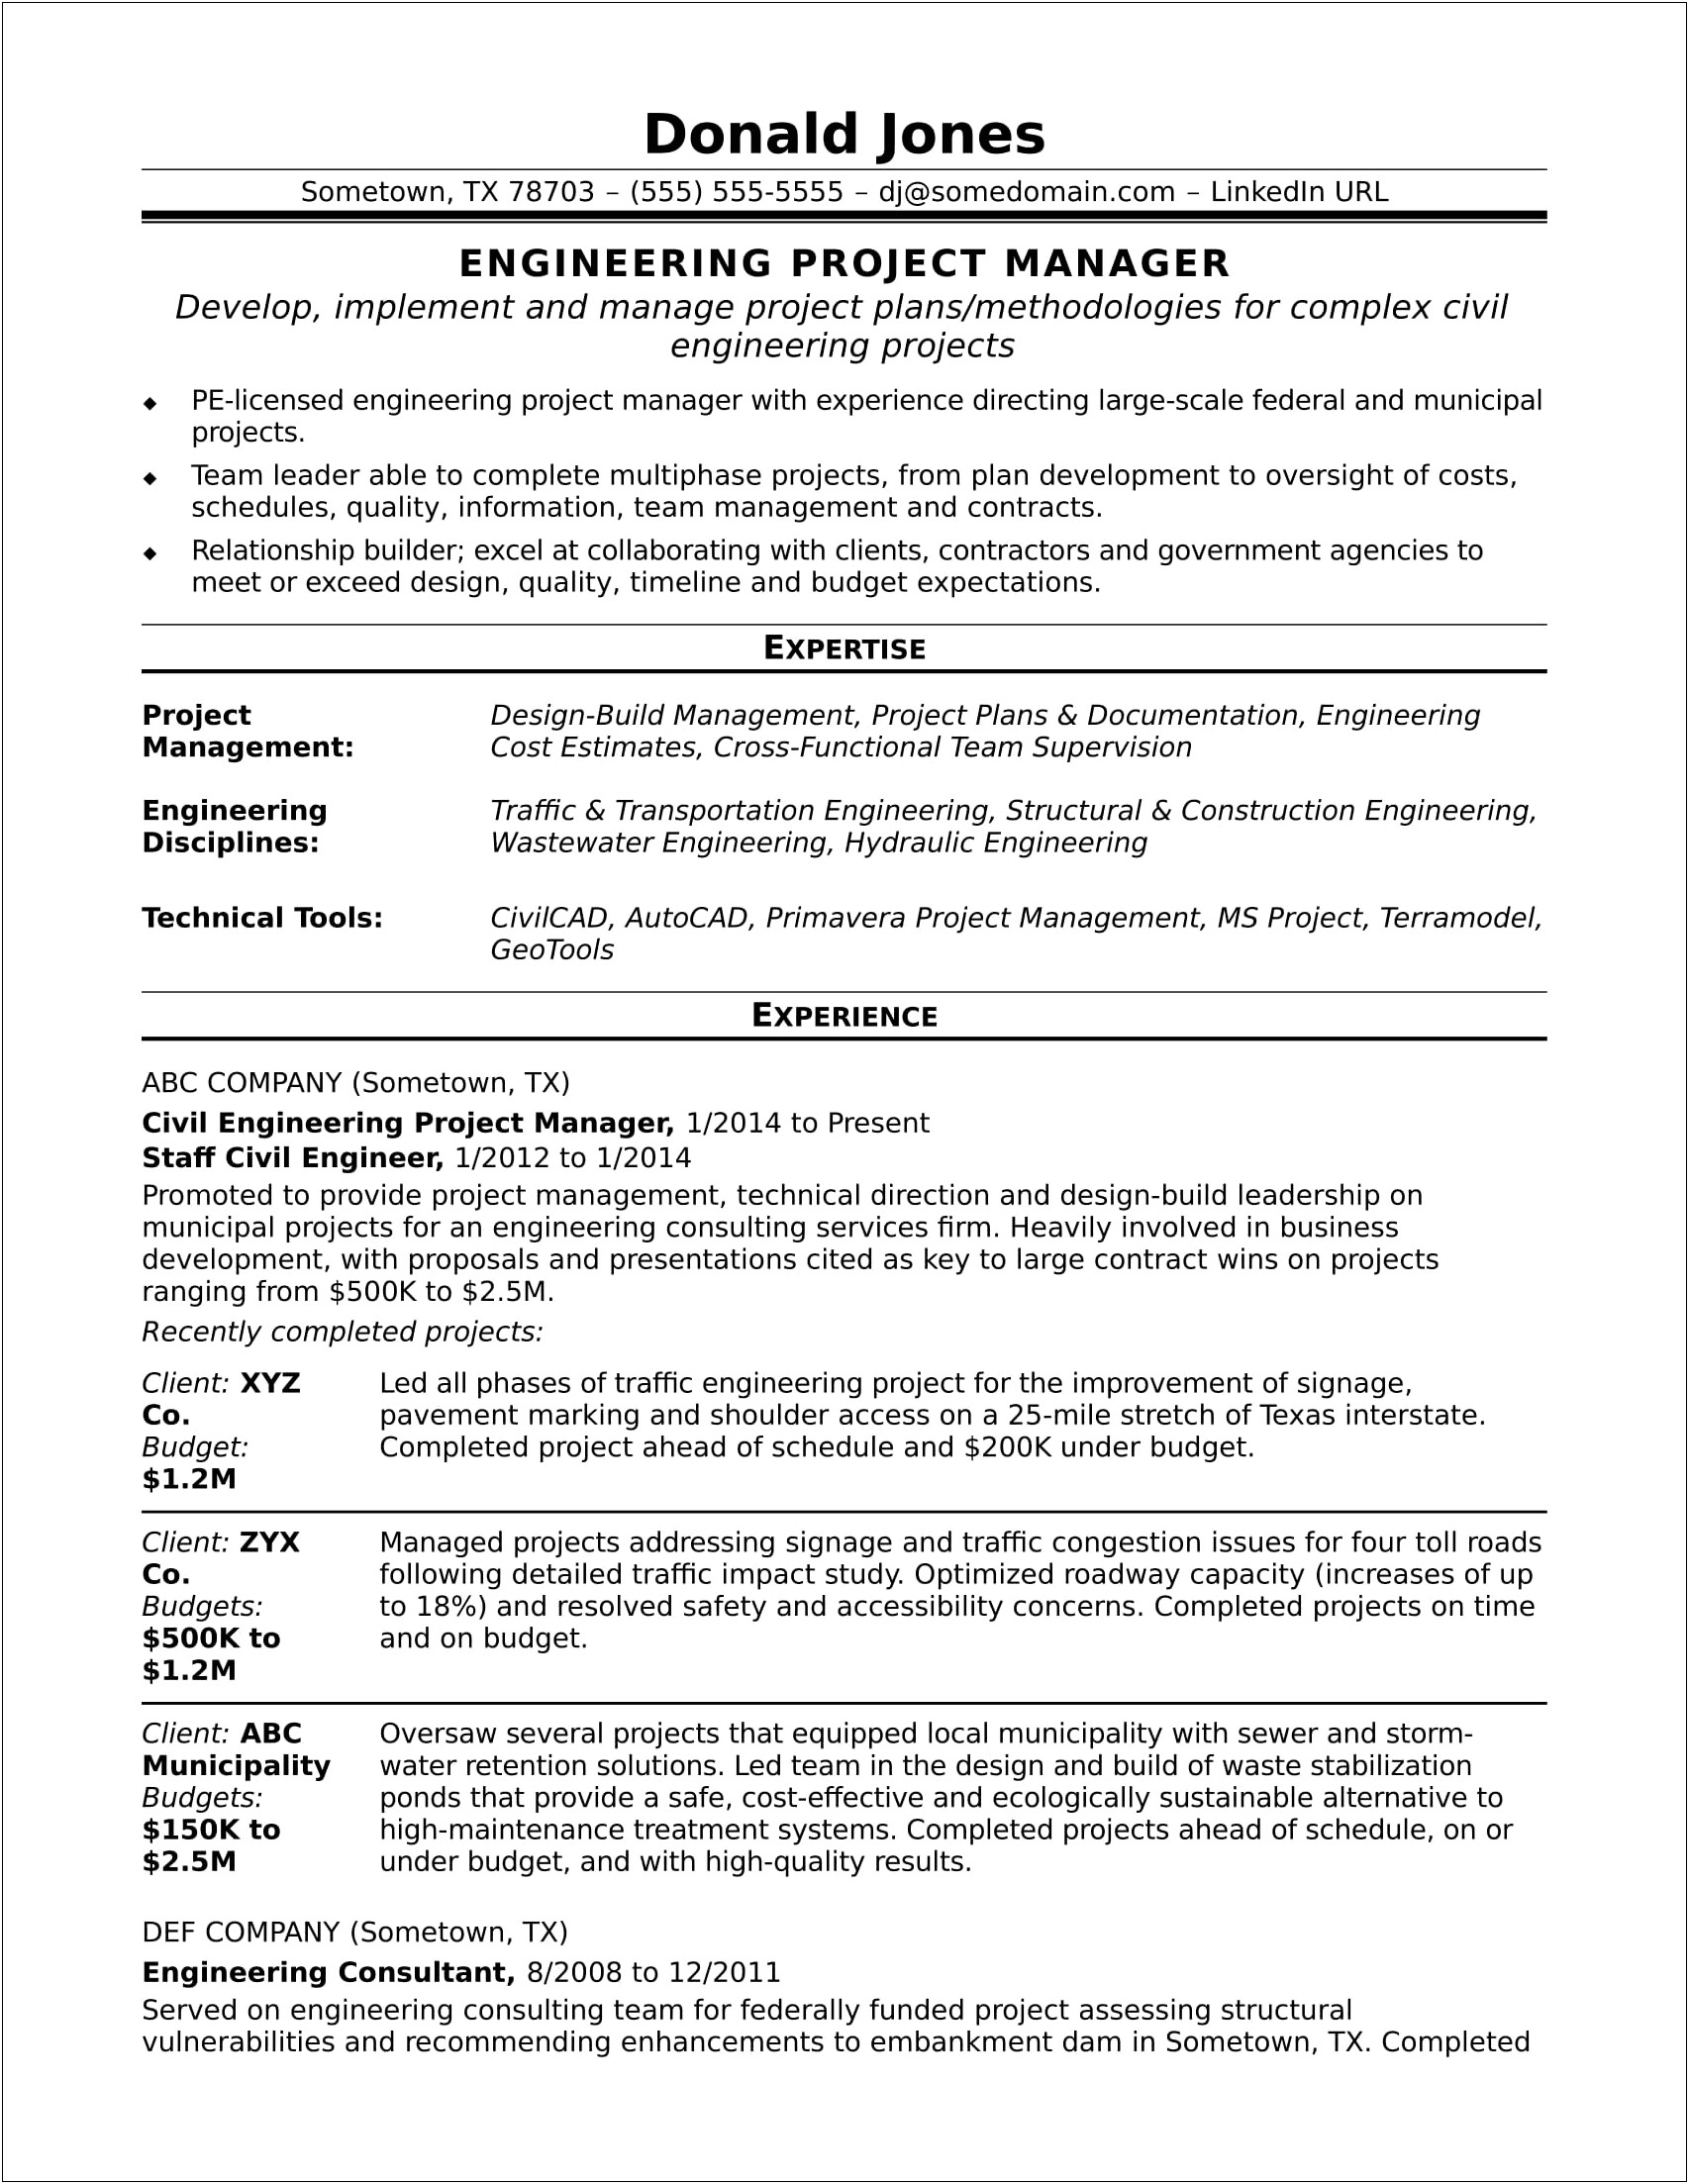 Listing Project Management On Resume